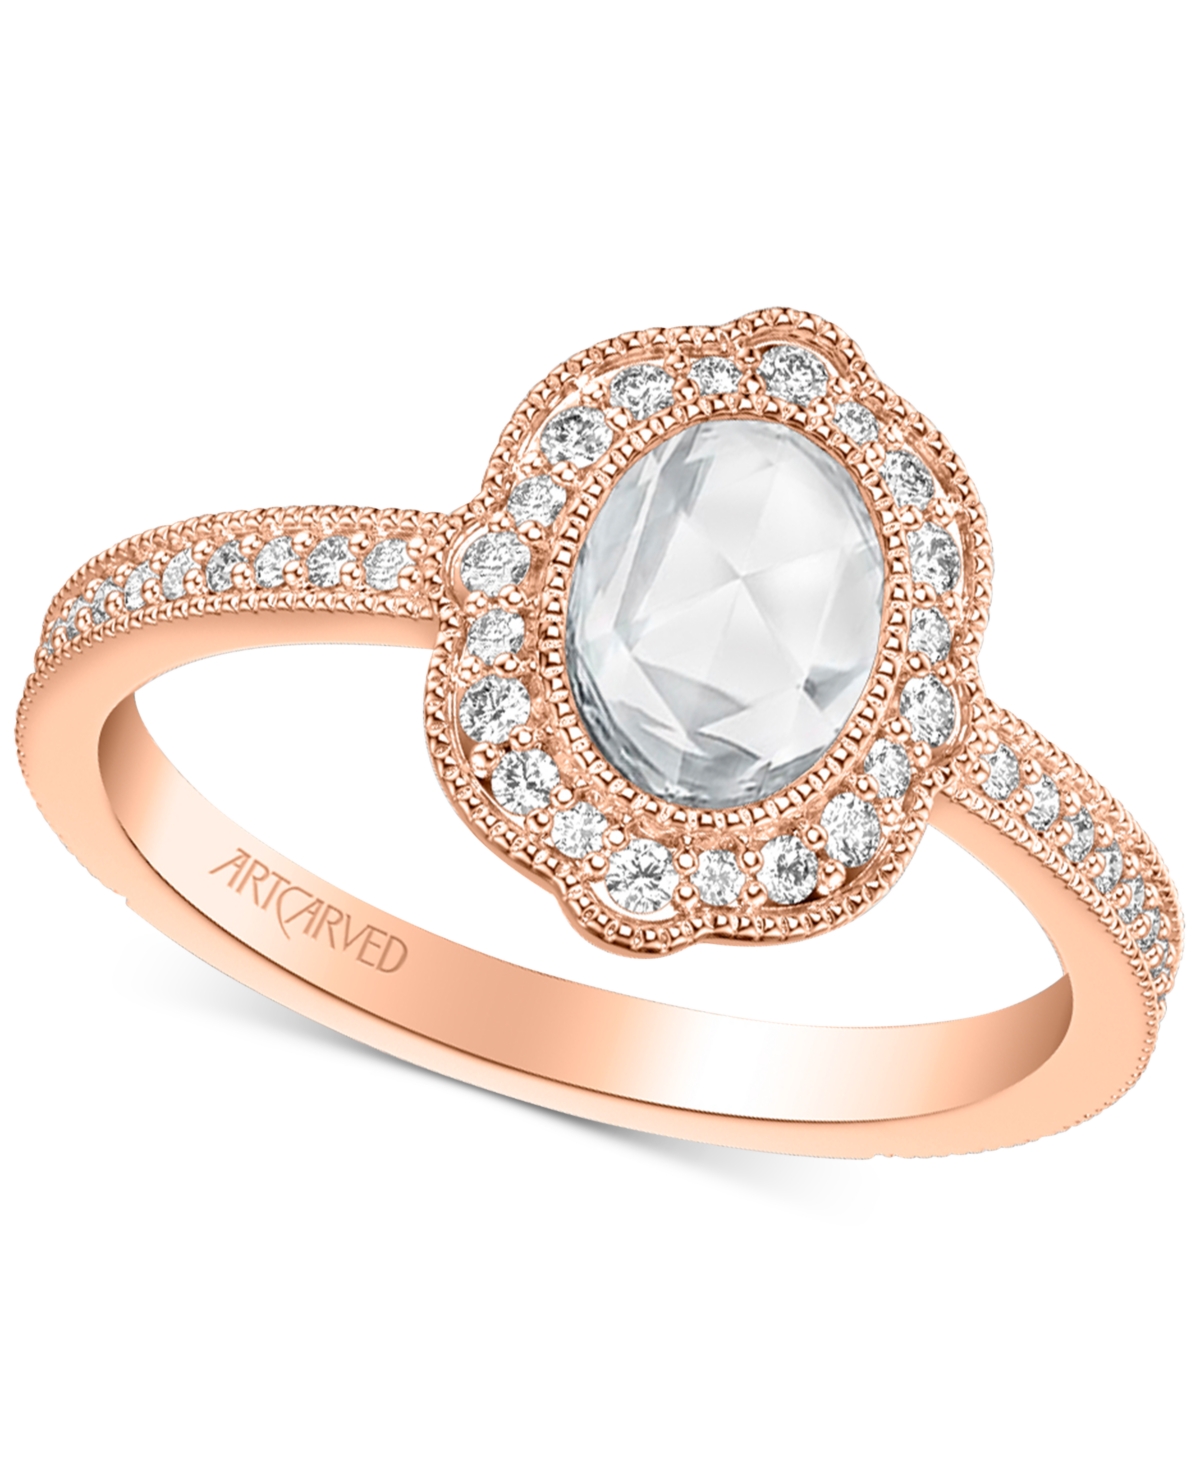 Artcarved Art Carved Diamond Oval Rose-Cut Engagement Ring (3/4 ct. t.w.) in 14k White, Yellow or Rose Gold